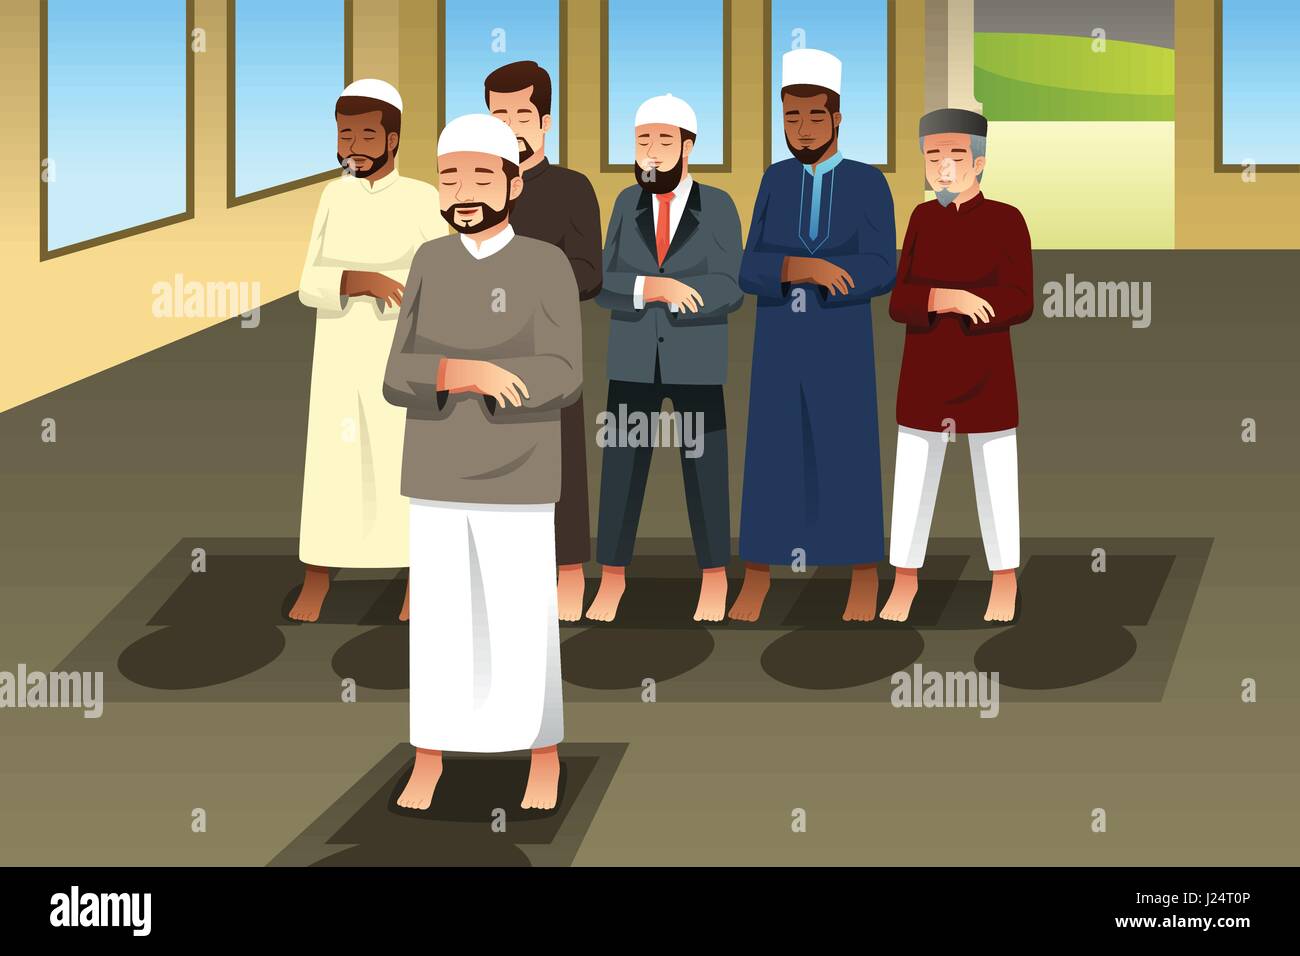 A vector illustration of Muslim Men Praying in Mosque Stock Vector